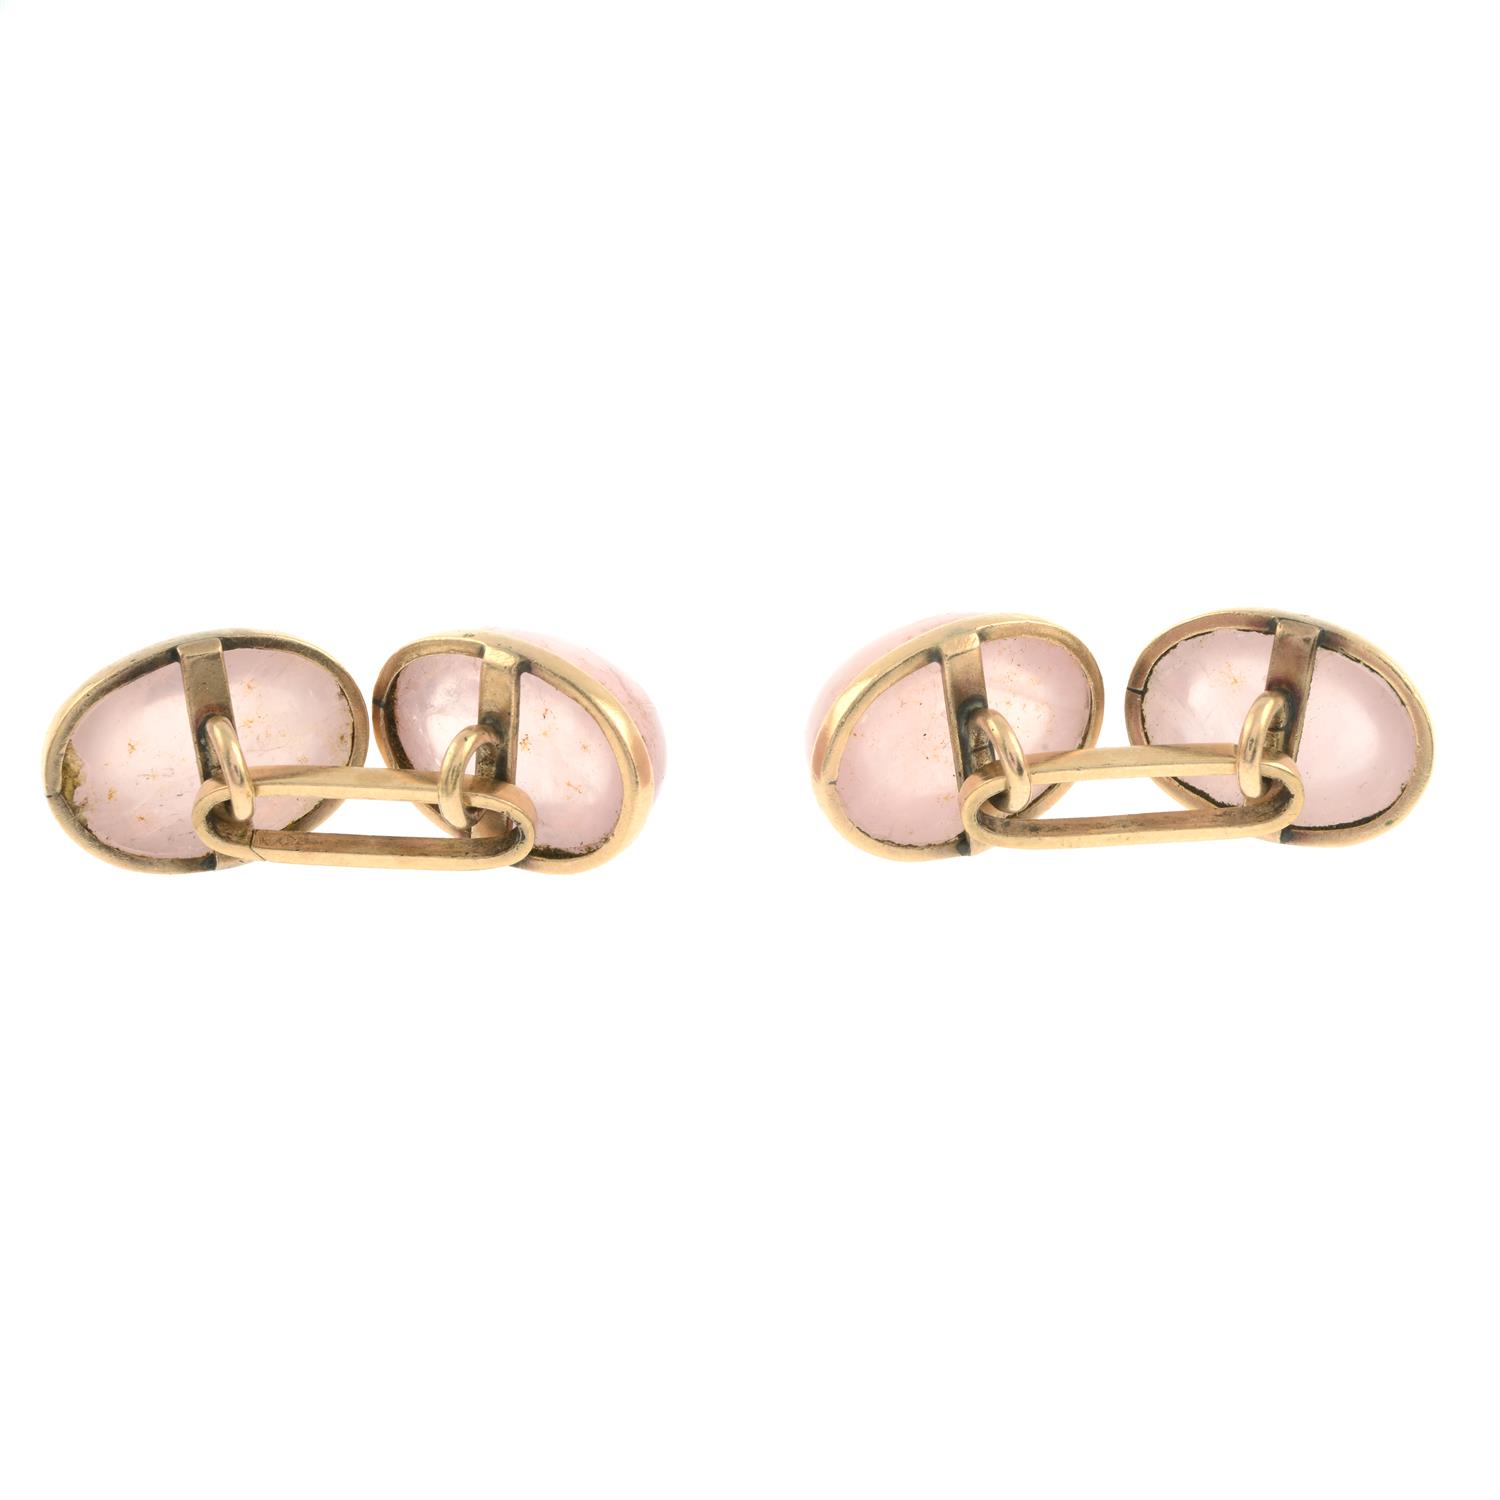 A pair of early to mid 20th century gold rose quartz cabochon cufflinks. - Image 3 of 3